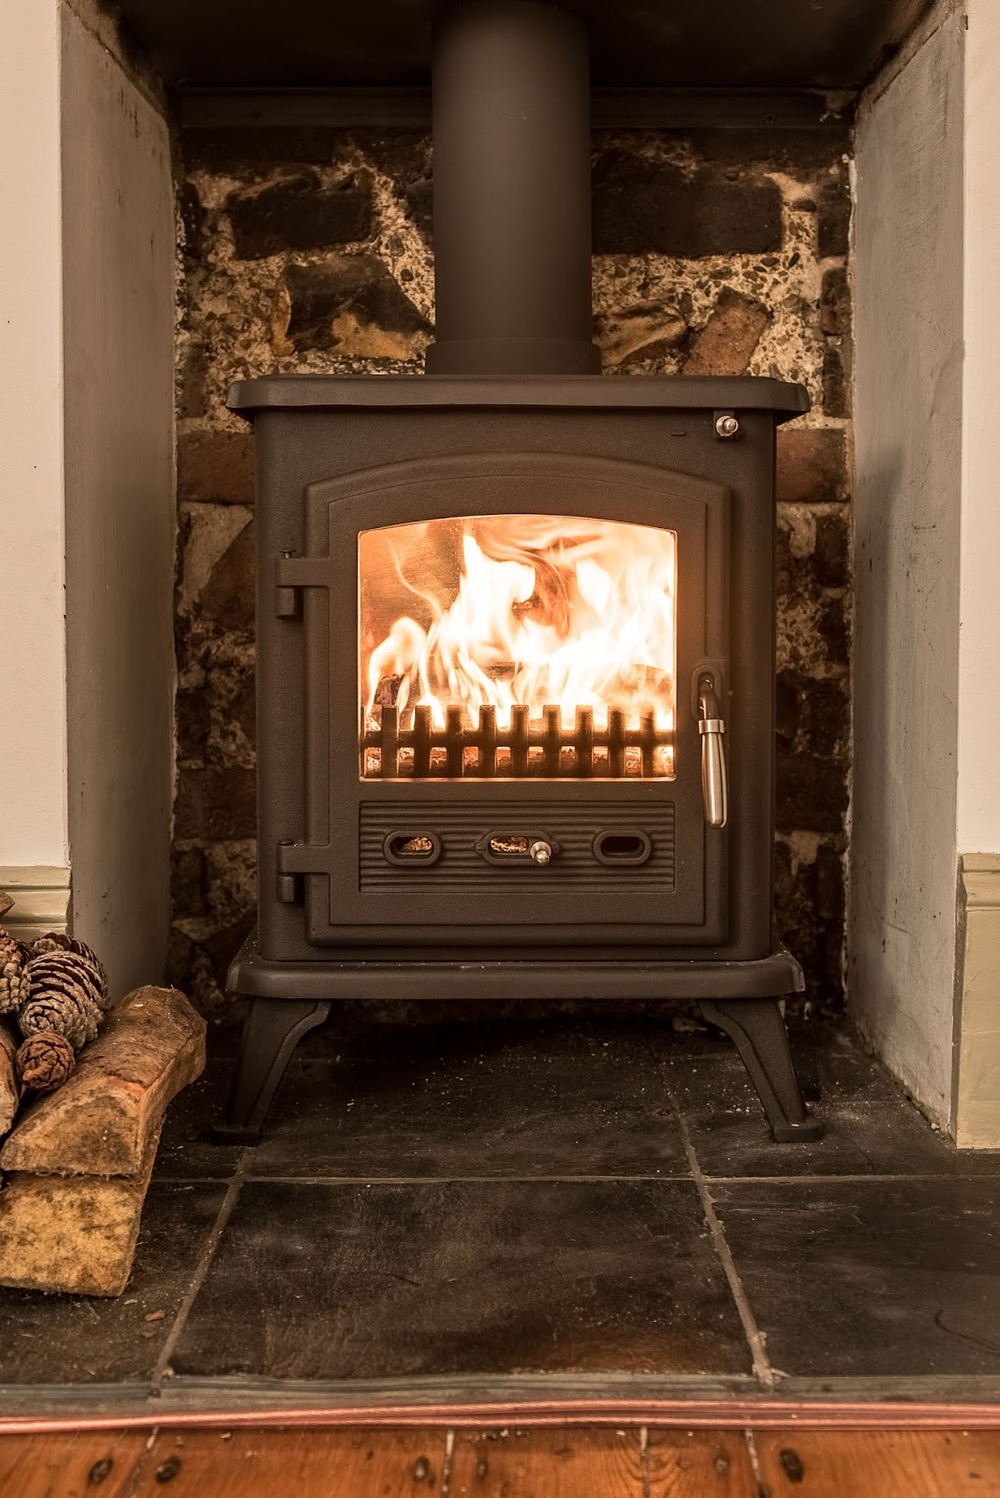 Getting a wood burning stove fitted: Before + After photos